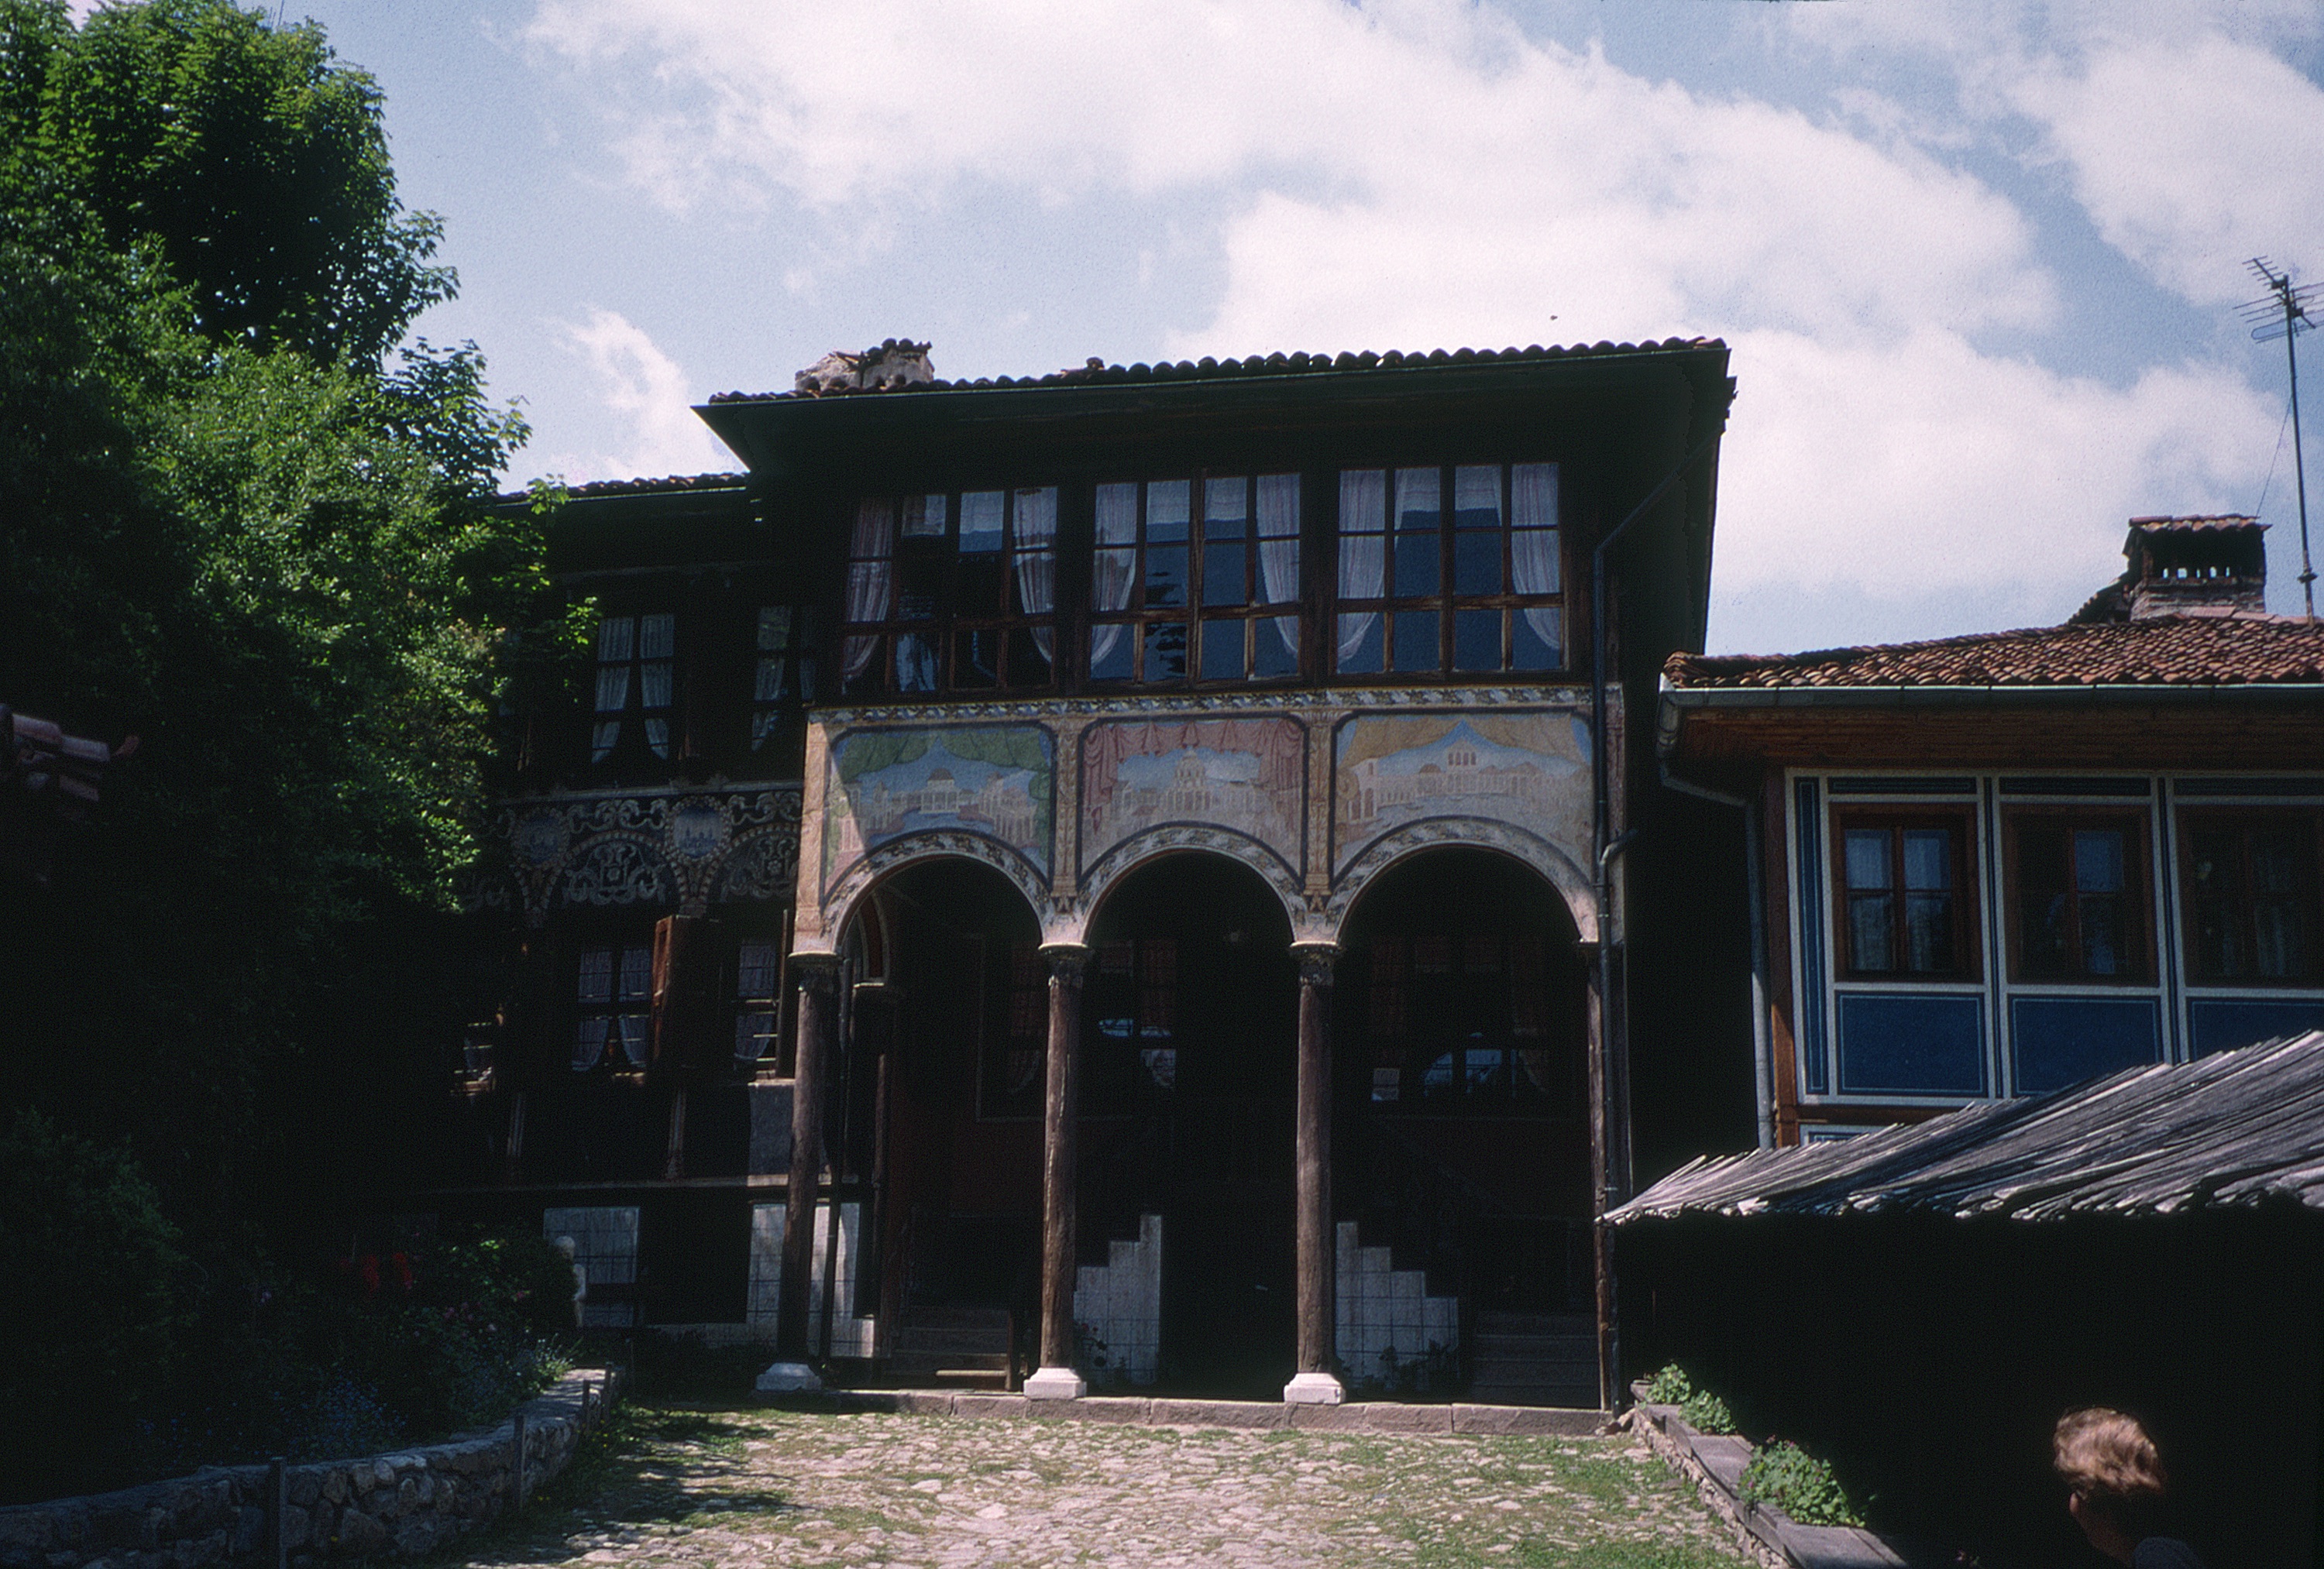 <p>The Oslekova kăšta, constructed in the 1850s, represents the late national revival period of traditional dwelling architecture. Koprivštica had become a wealthy town and a center of resistance to the Ottoman powers. The dwelling was conceived as a symetrically organized composition but Nenčo Oslekov was not able to purchase the property to the right. The grand dwellings of this period replaced the čardak space with a central salon with glazed openings on each level. The building design is attributed to Usta Minčo and murals by Kosta Zograf, both artisans from Samokov.</p>